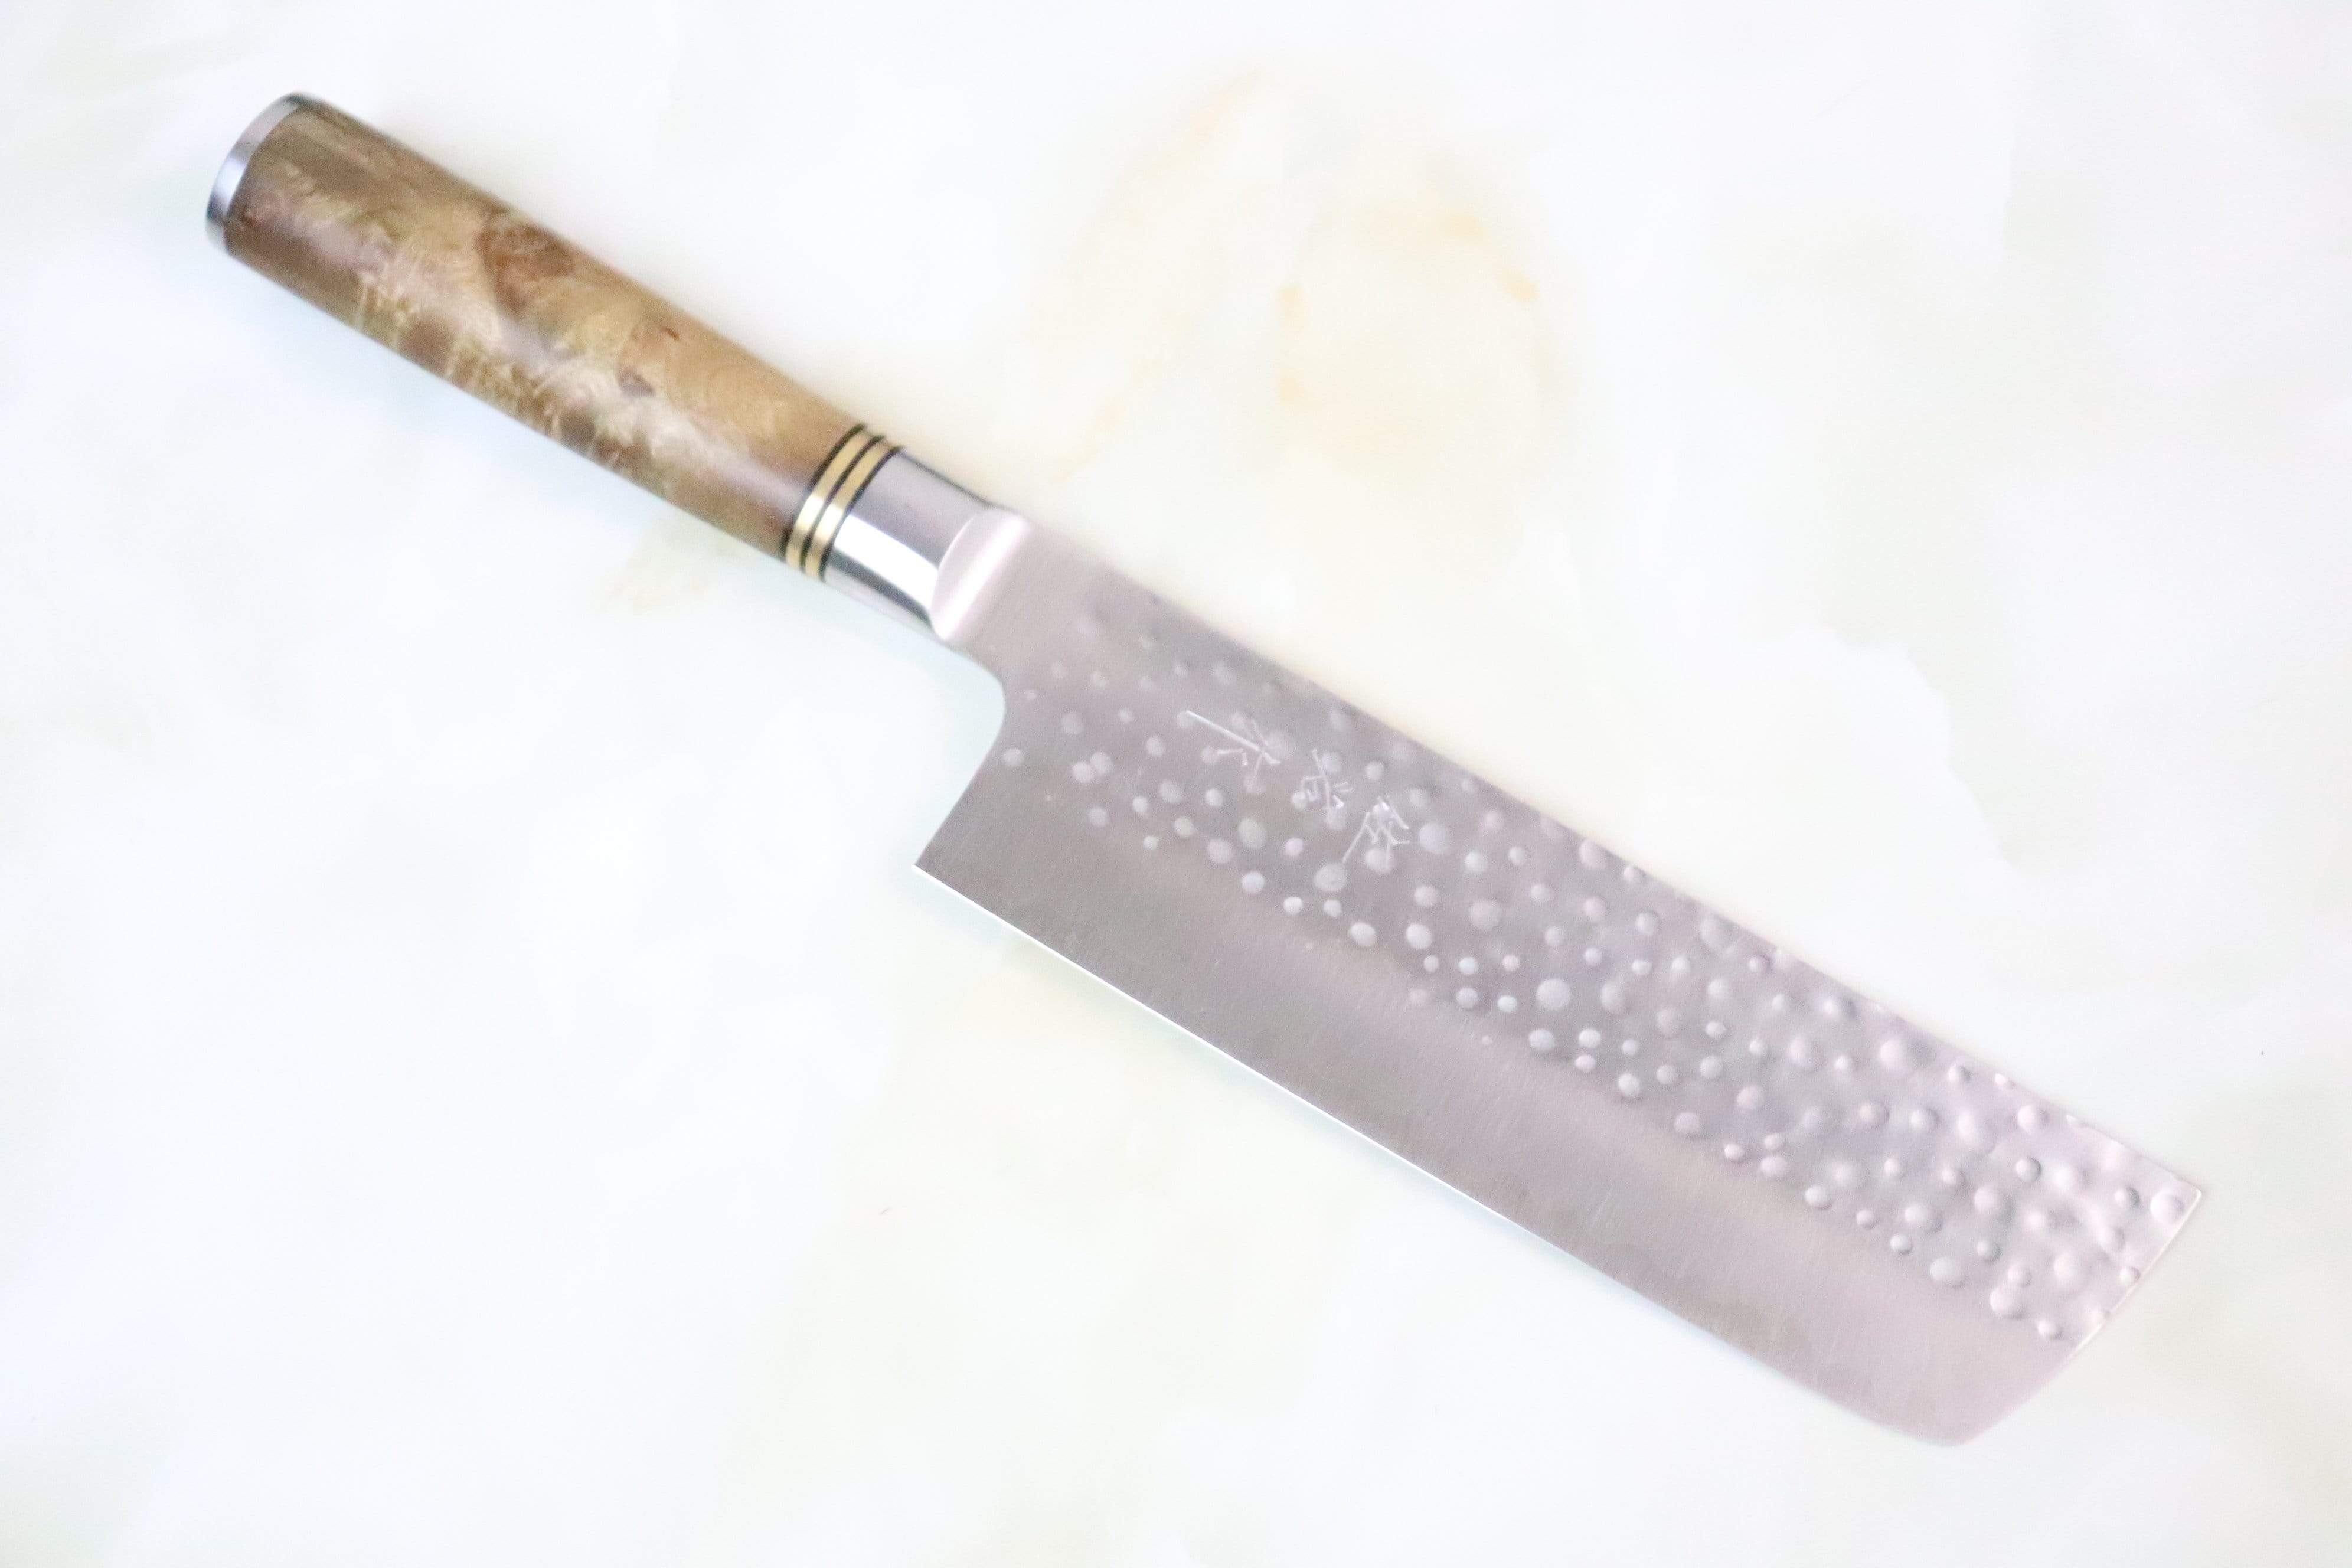 Hand Forged Nakiri Knife 160 Mm Blade Clad Steel Vegetables Tools Cleaver Kitchen  Knives 